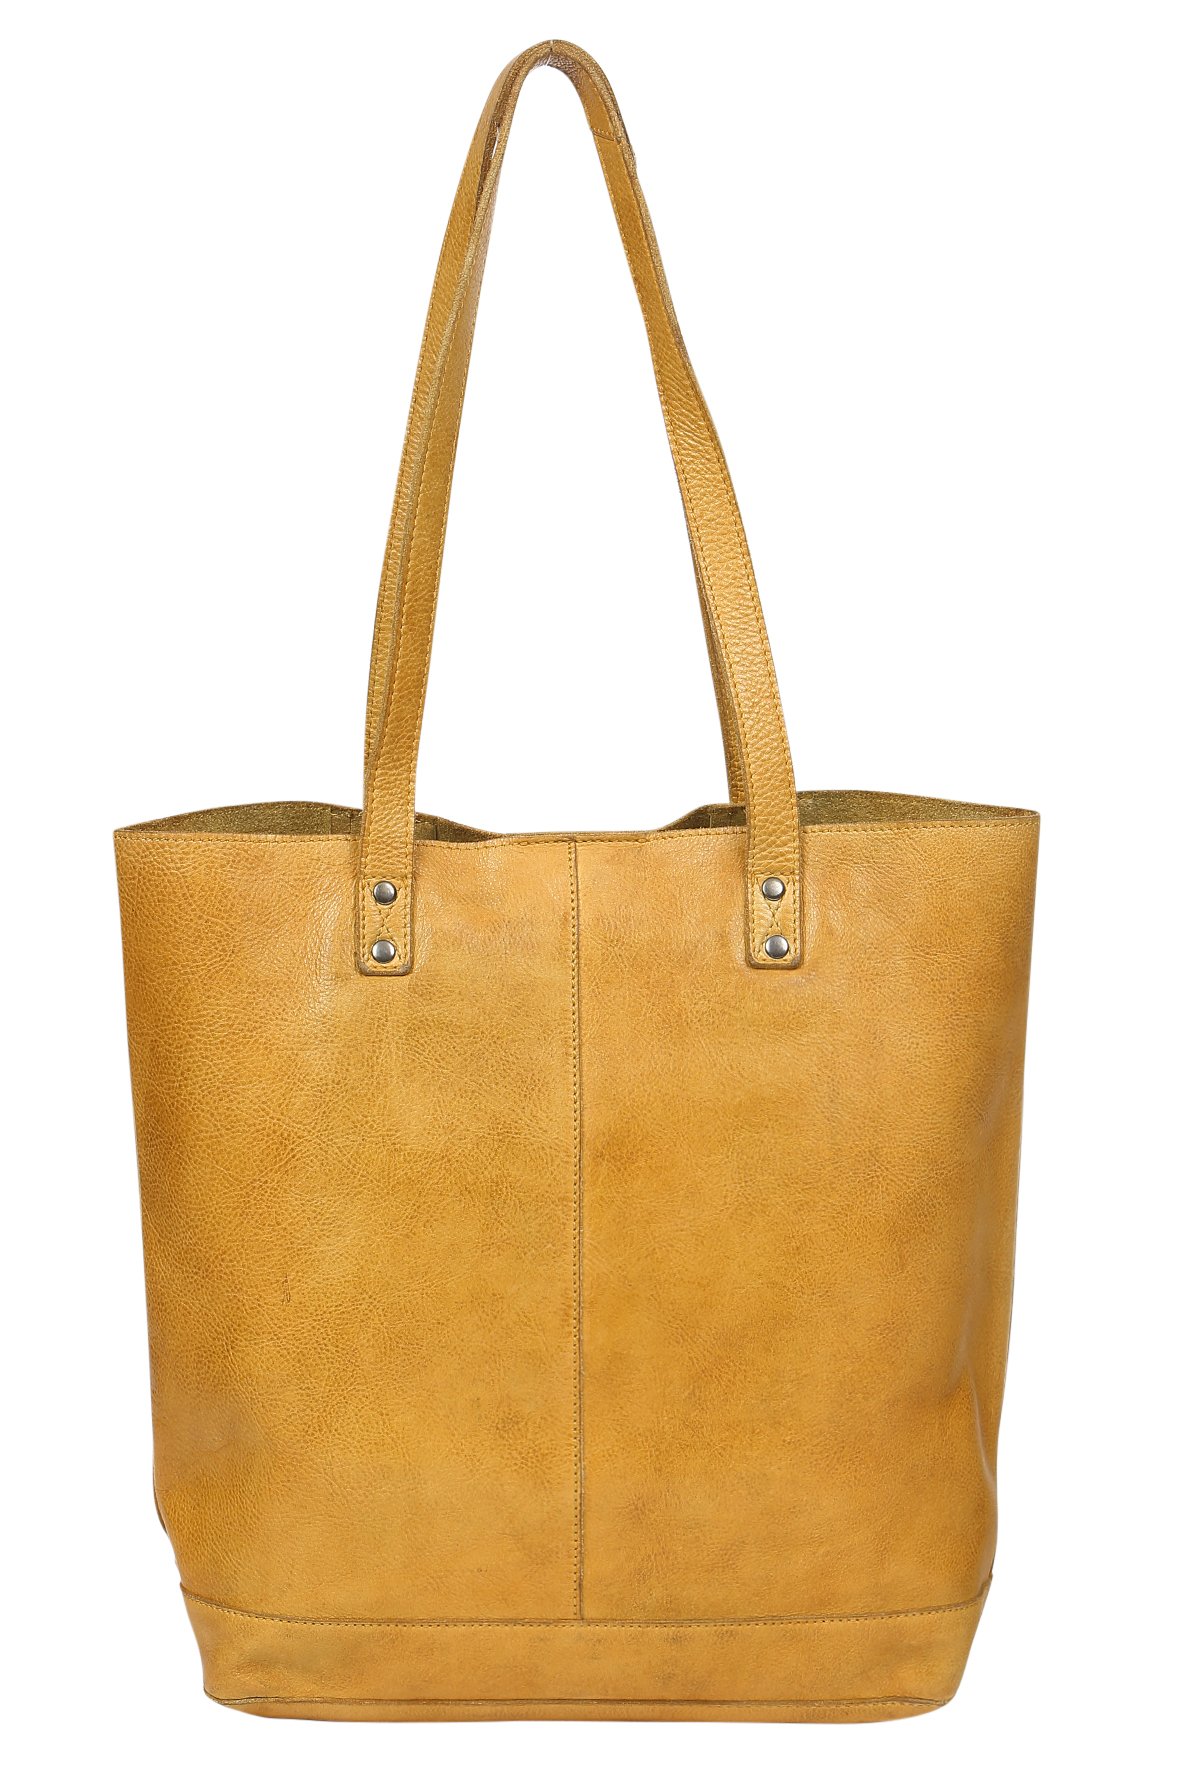 Vintage Leather Tote | Leather Handbag | Tote | The Leather Crew